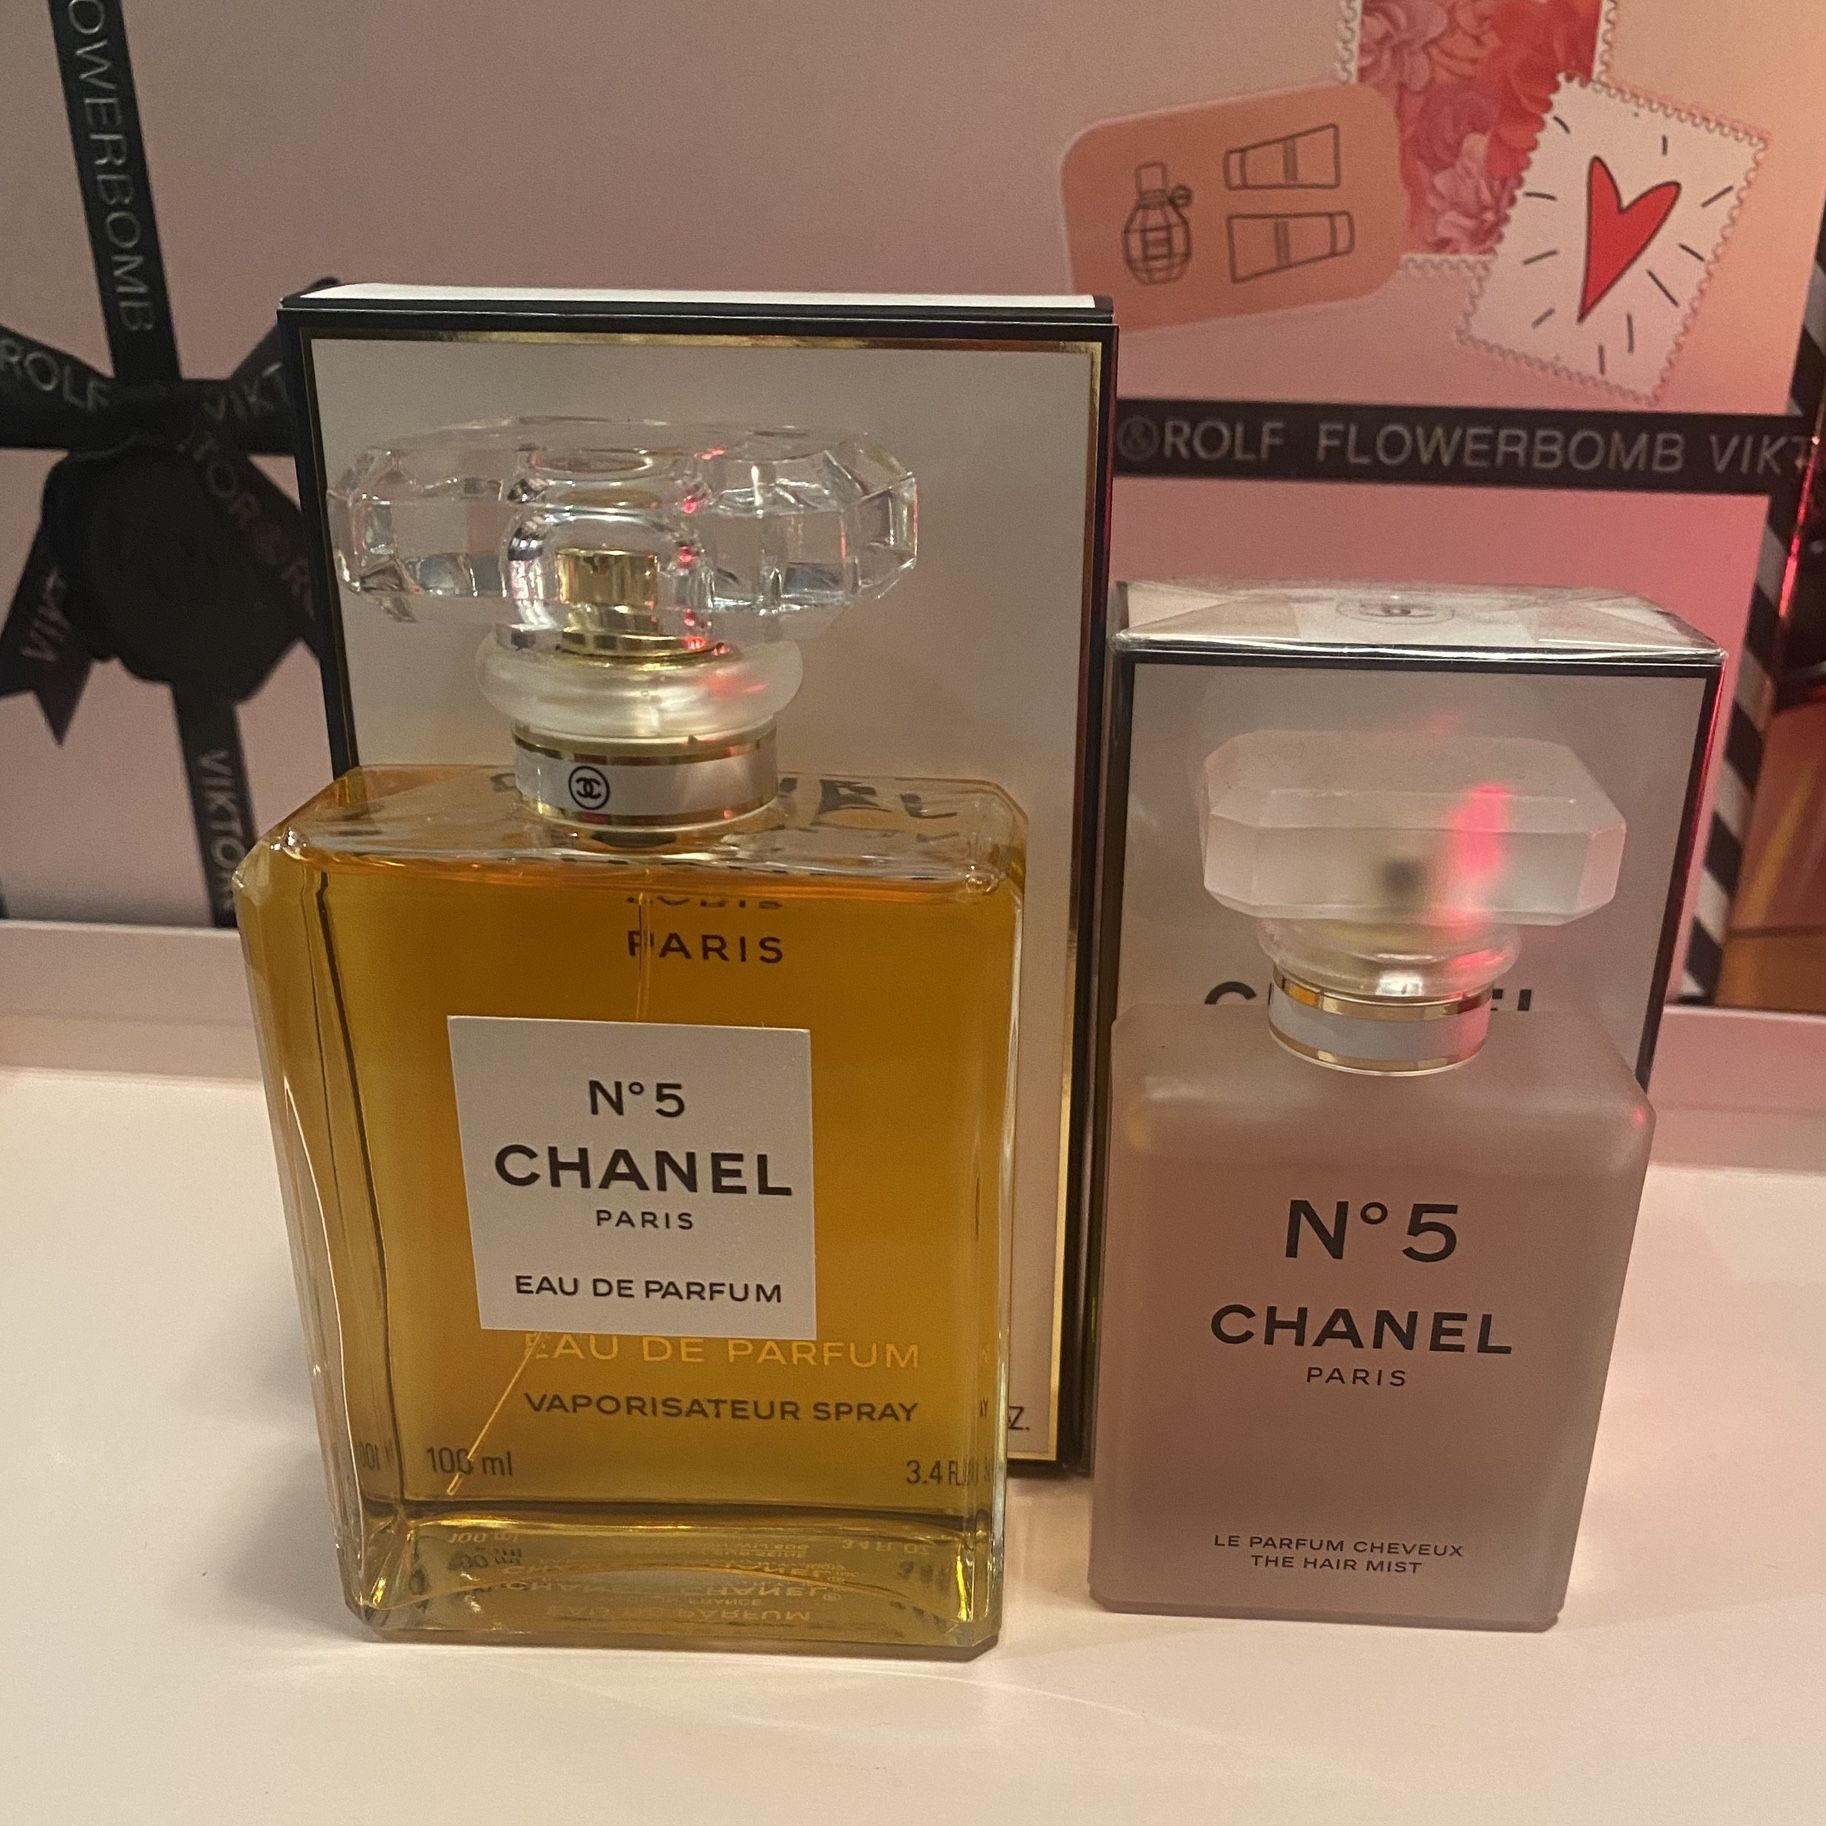 Chanel N 5 Perfume And Hair Mist Original for Sale in Whittier, CA